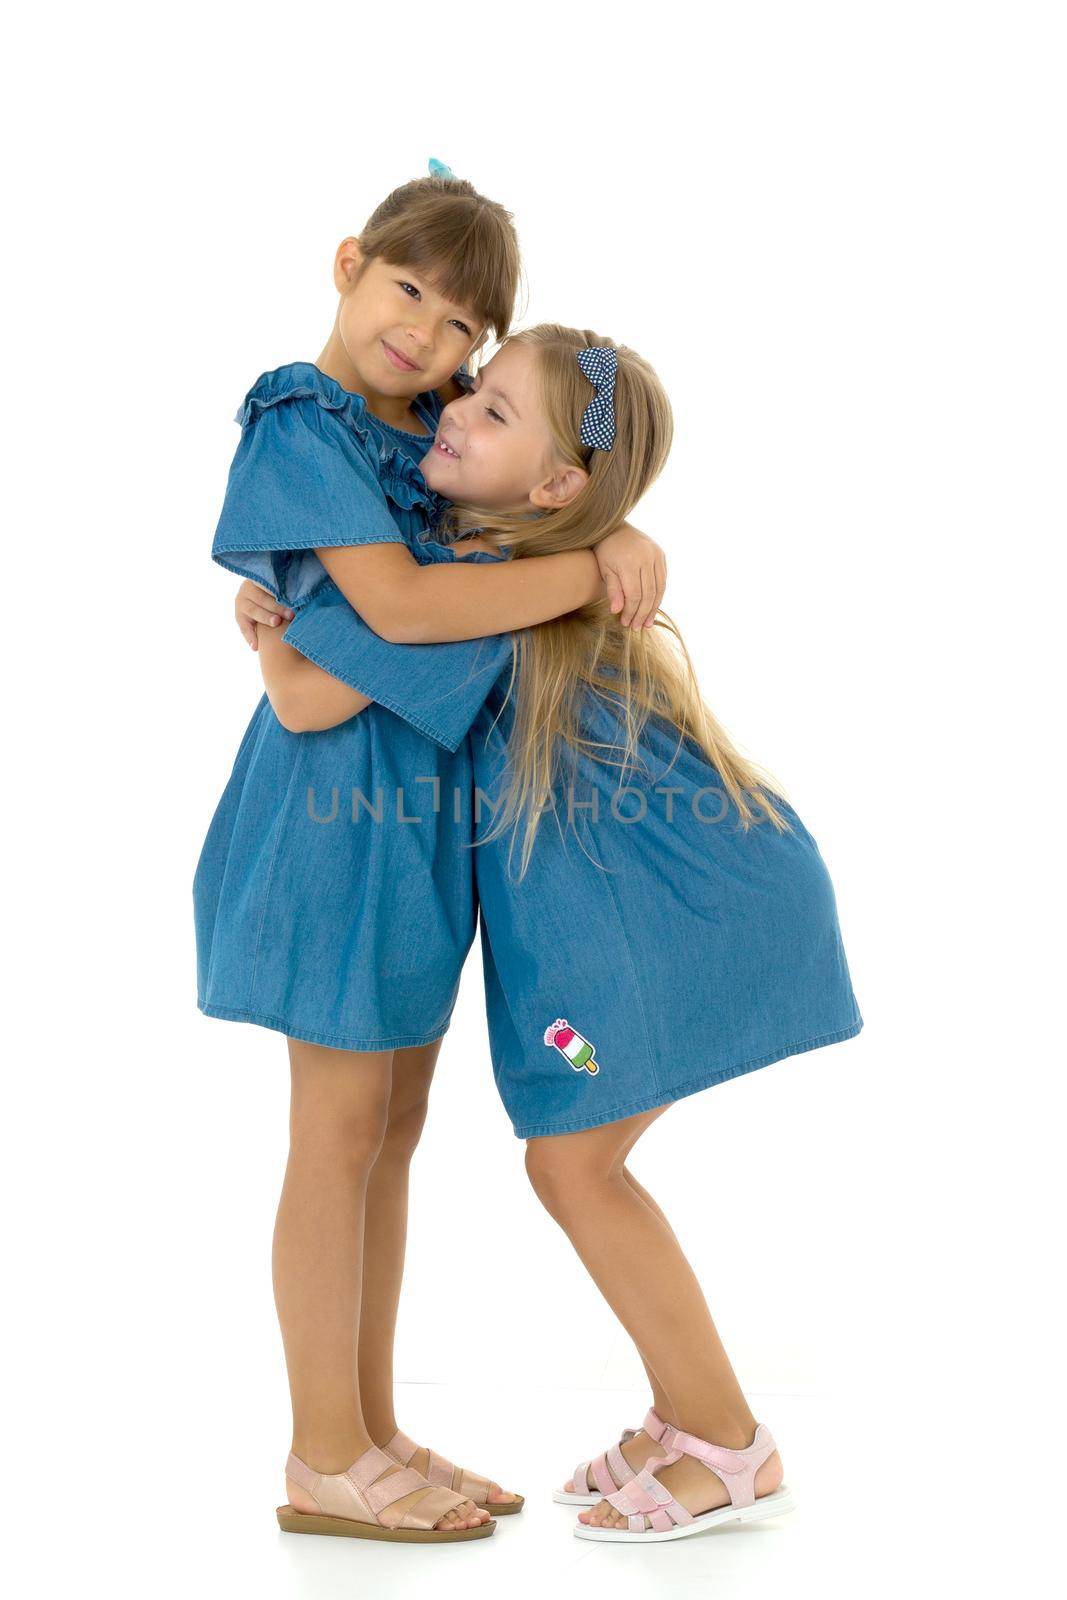 Two happy girls hugging each other. Adorable girls dressed in the same dresses having fun together on isolated white background.